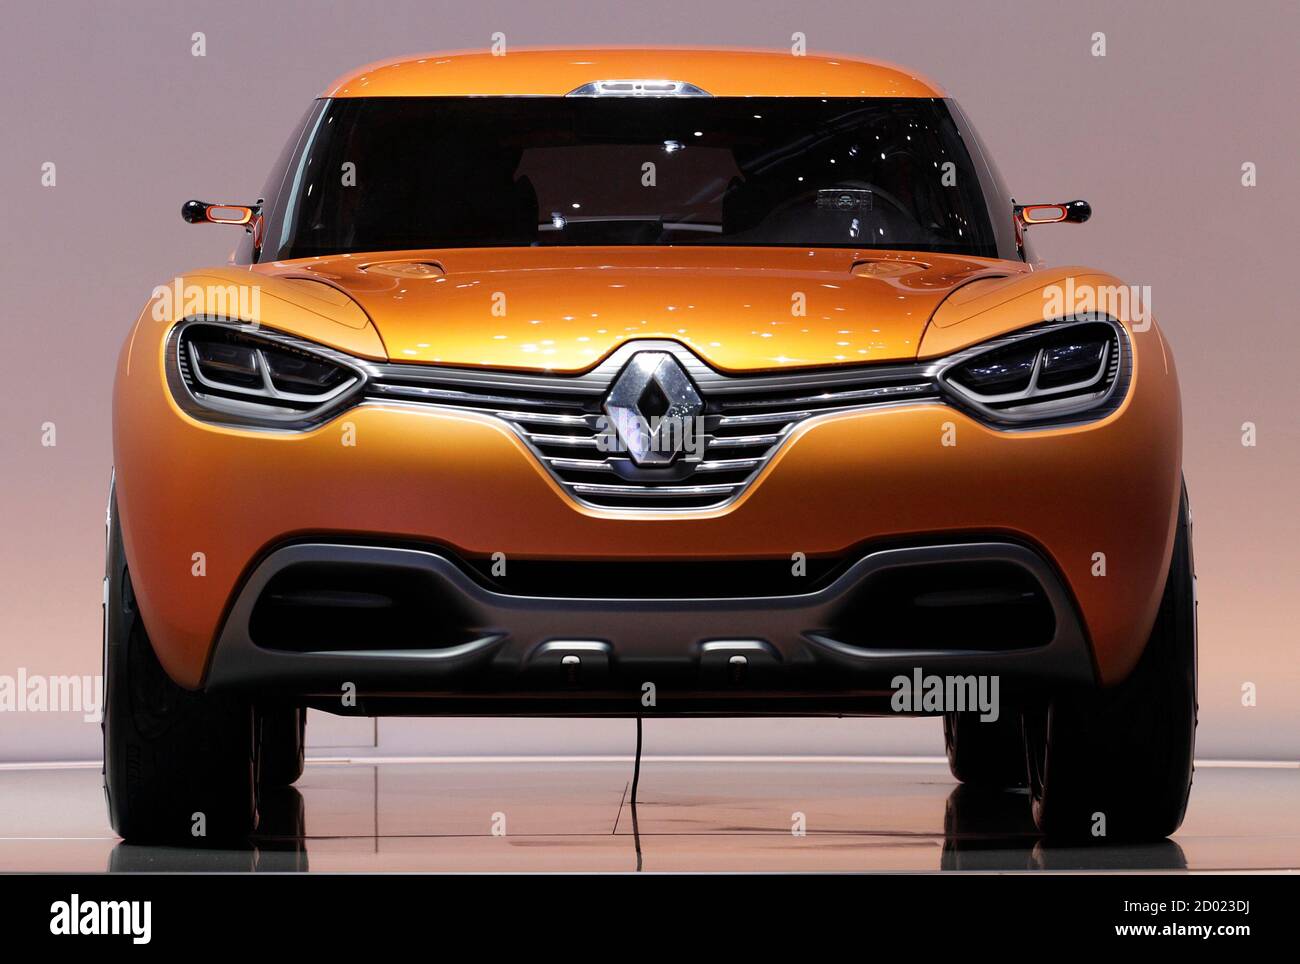 A new Renault Captur concept car is displayed during the first media day of  the 81st Geneva Car Show at the Palexpo in Geneva March 1, 2011.  REUTERS/Denis Balibouse (SWITZERLAND - Tags: